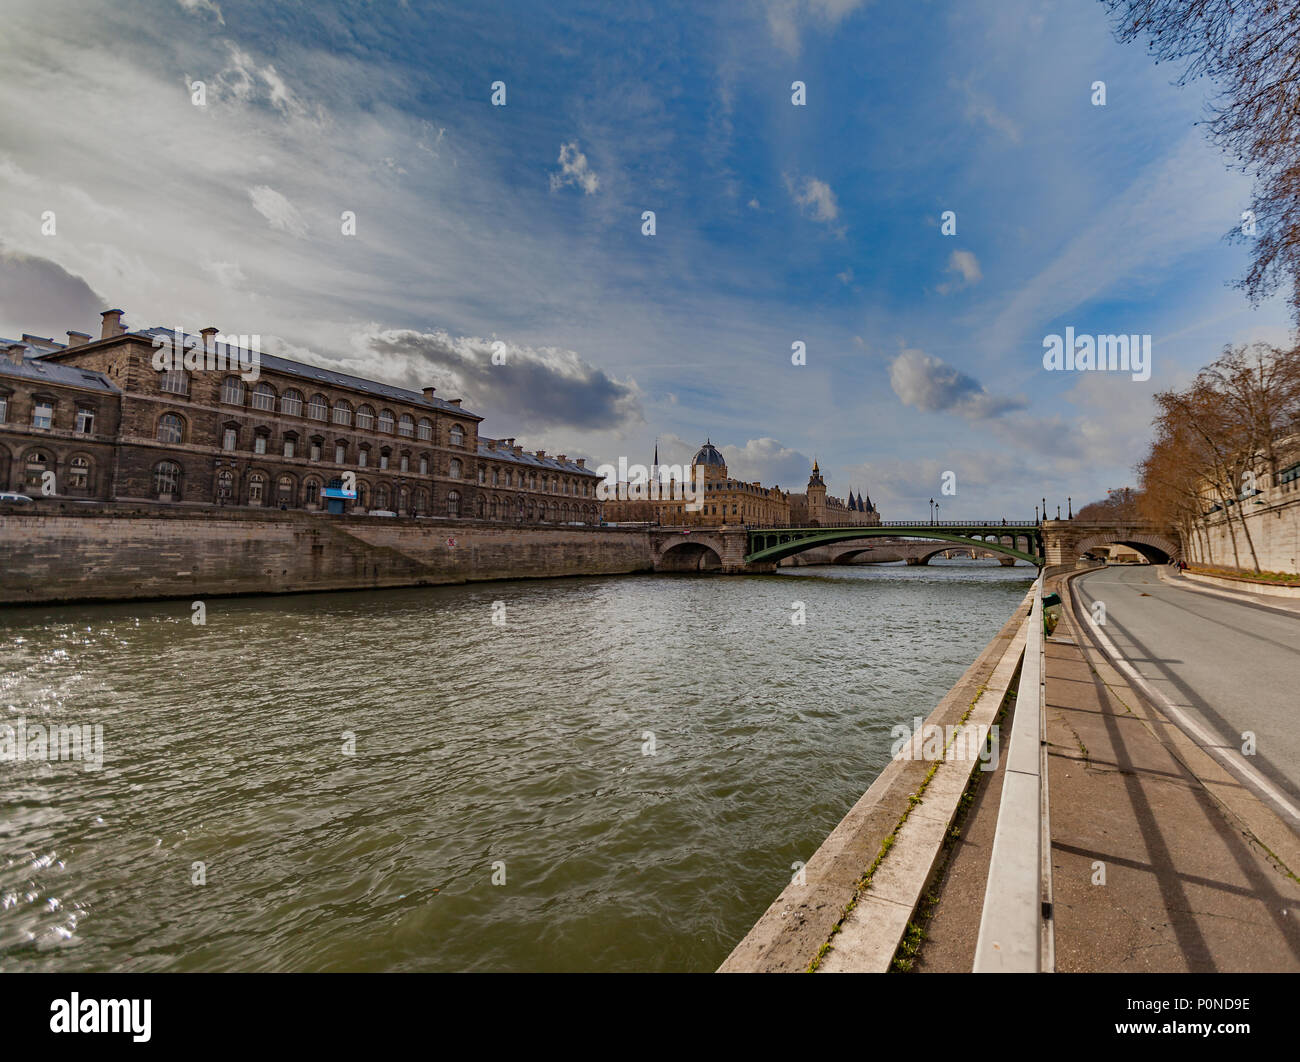 Wide angle view of a walk path along river Seine in Paris France, during a sunny day. Stock Photo